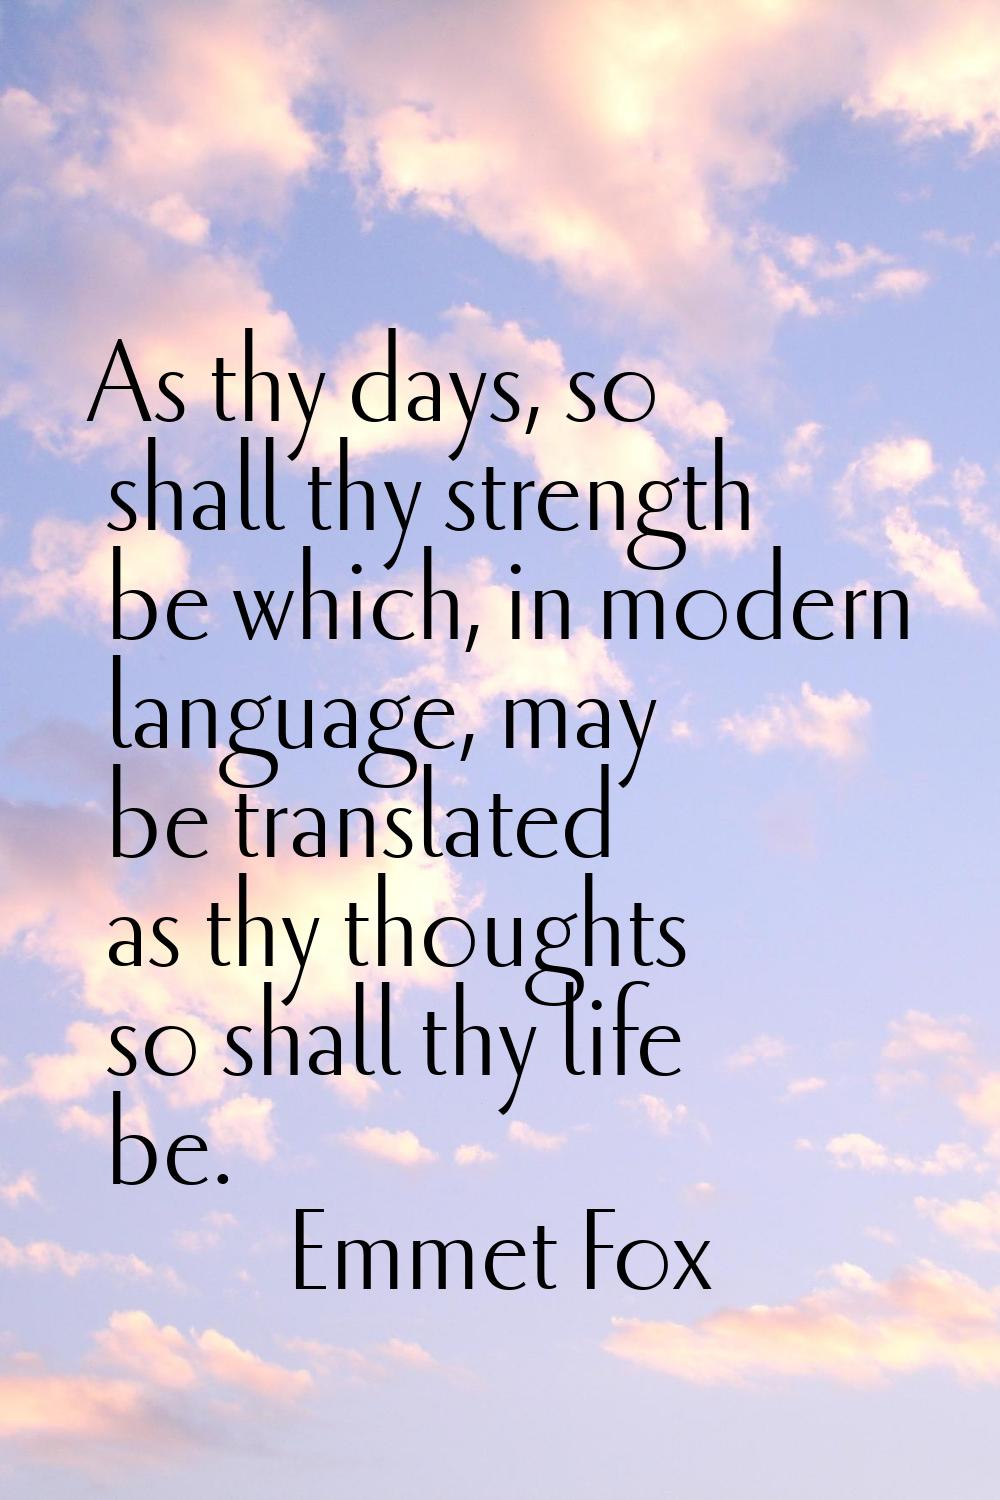 As thy days, so shall thy strength be which, in modern language, may be translated as thy thoughts 